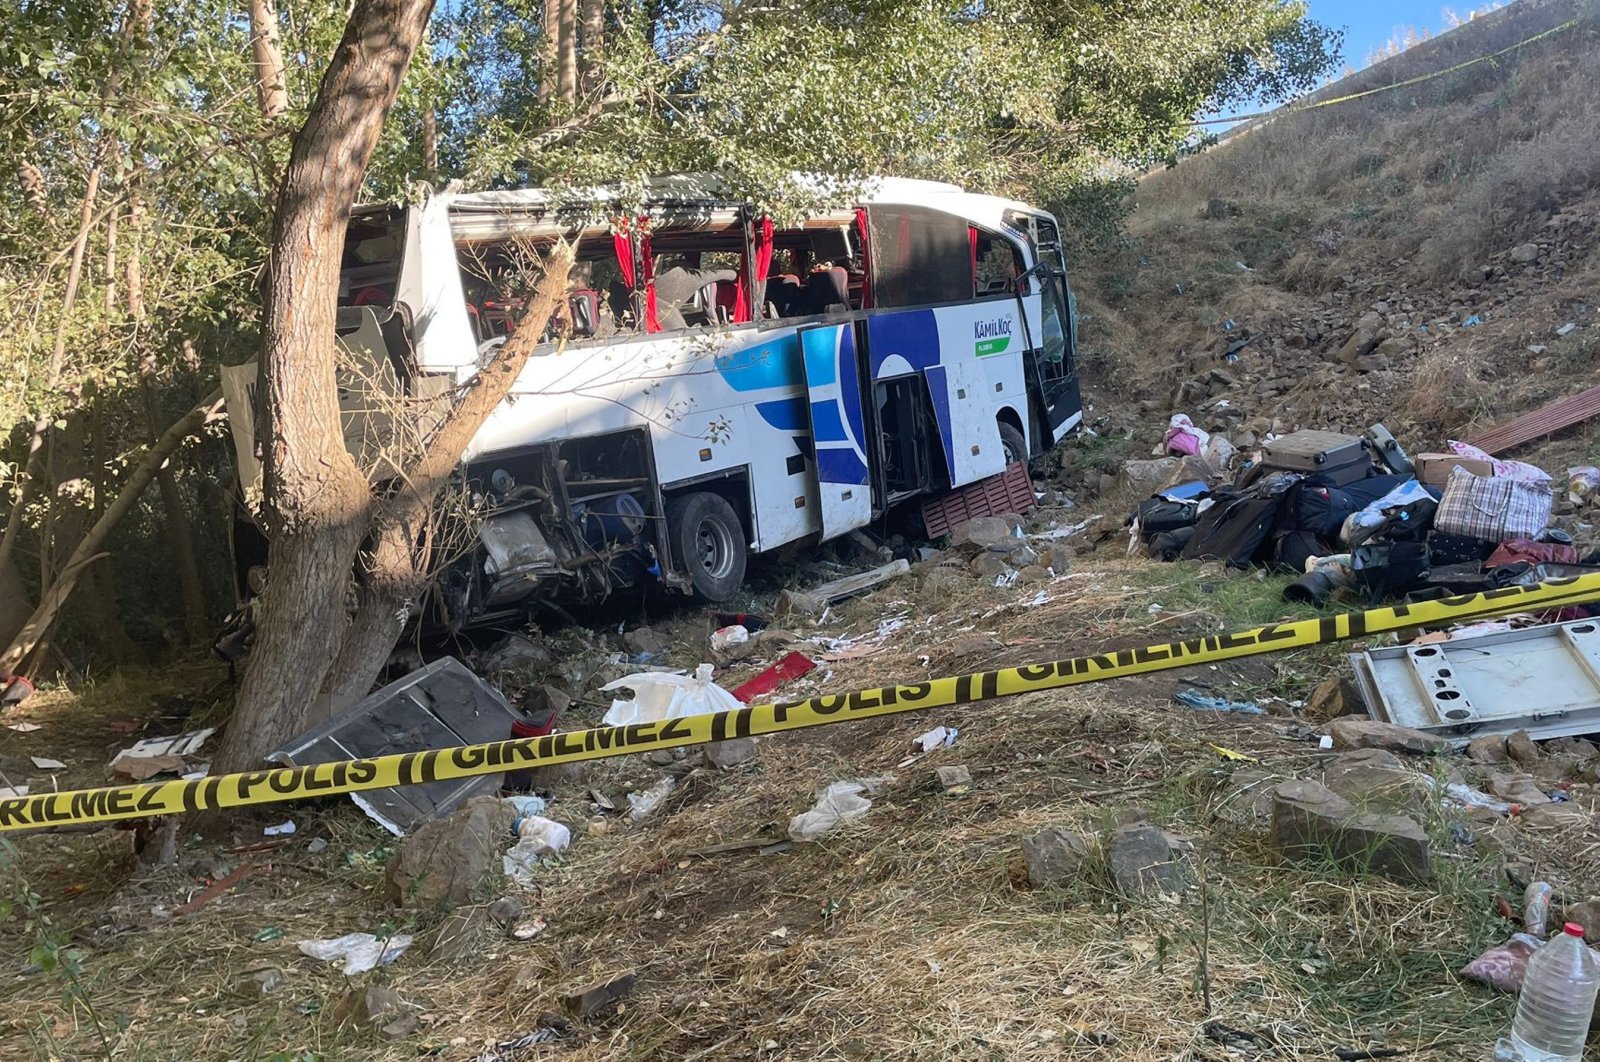 The scene of the accident after a passenger bus plunged into a ravine, Yozgat, central Türkiye, Aug. 21, 2023. (AA Photo)